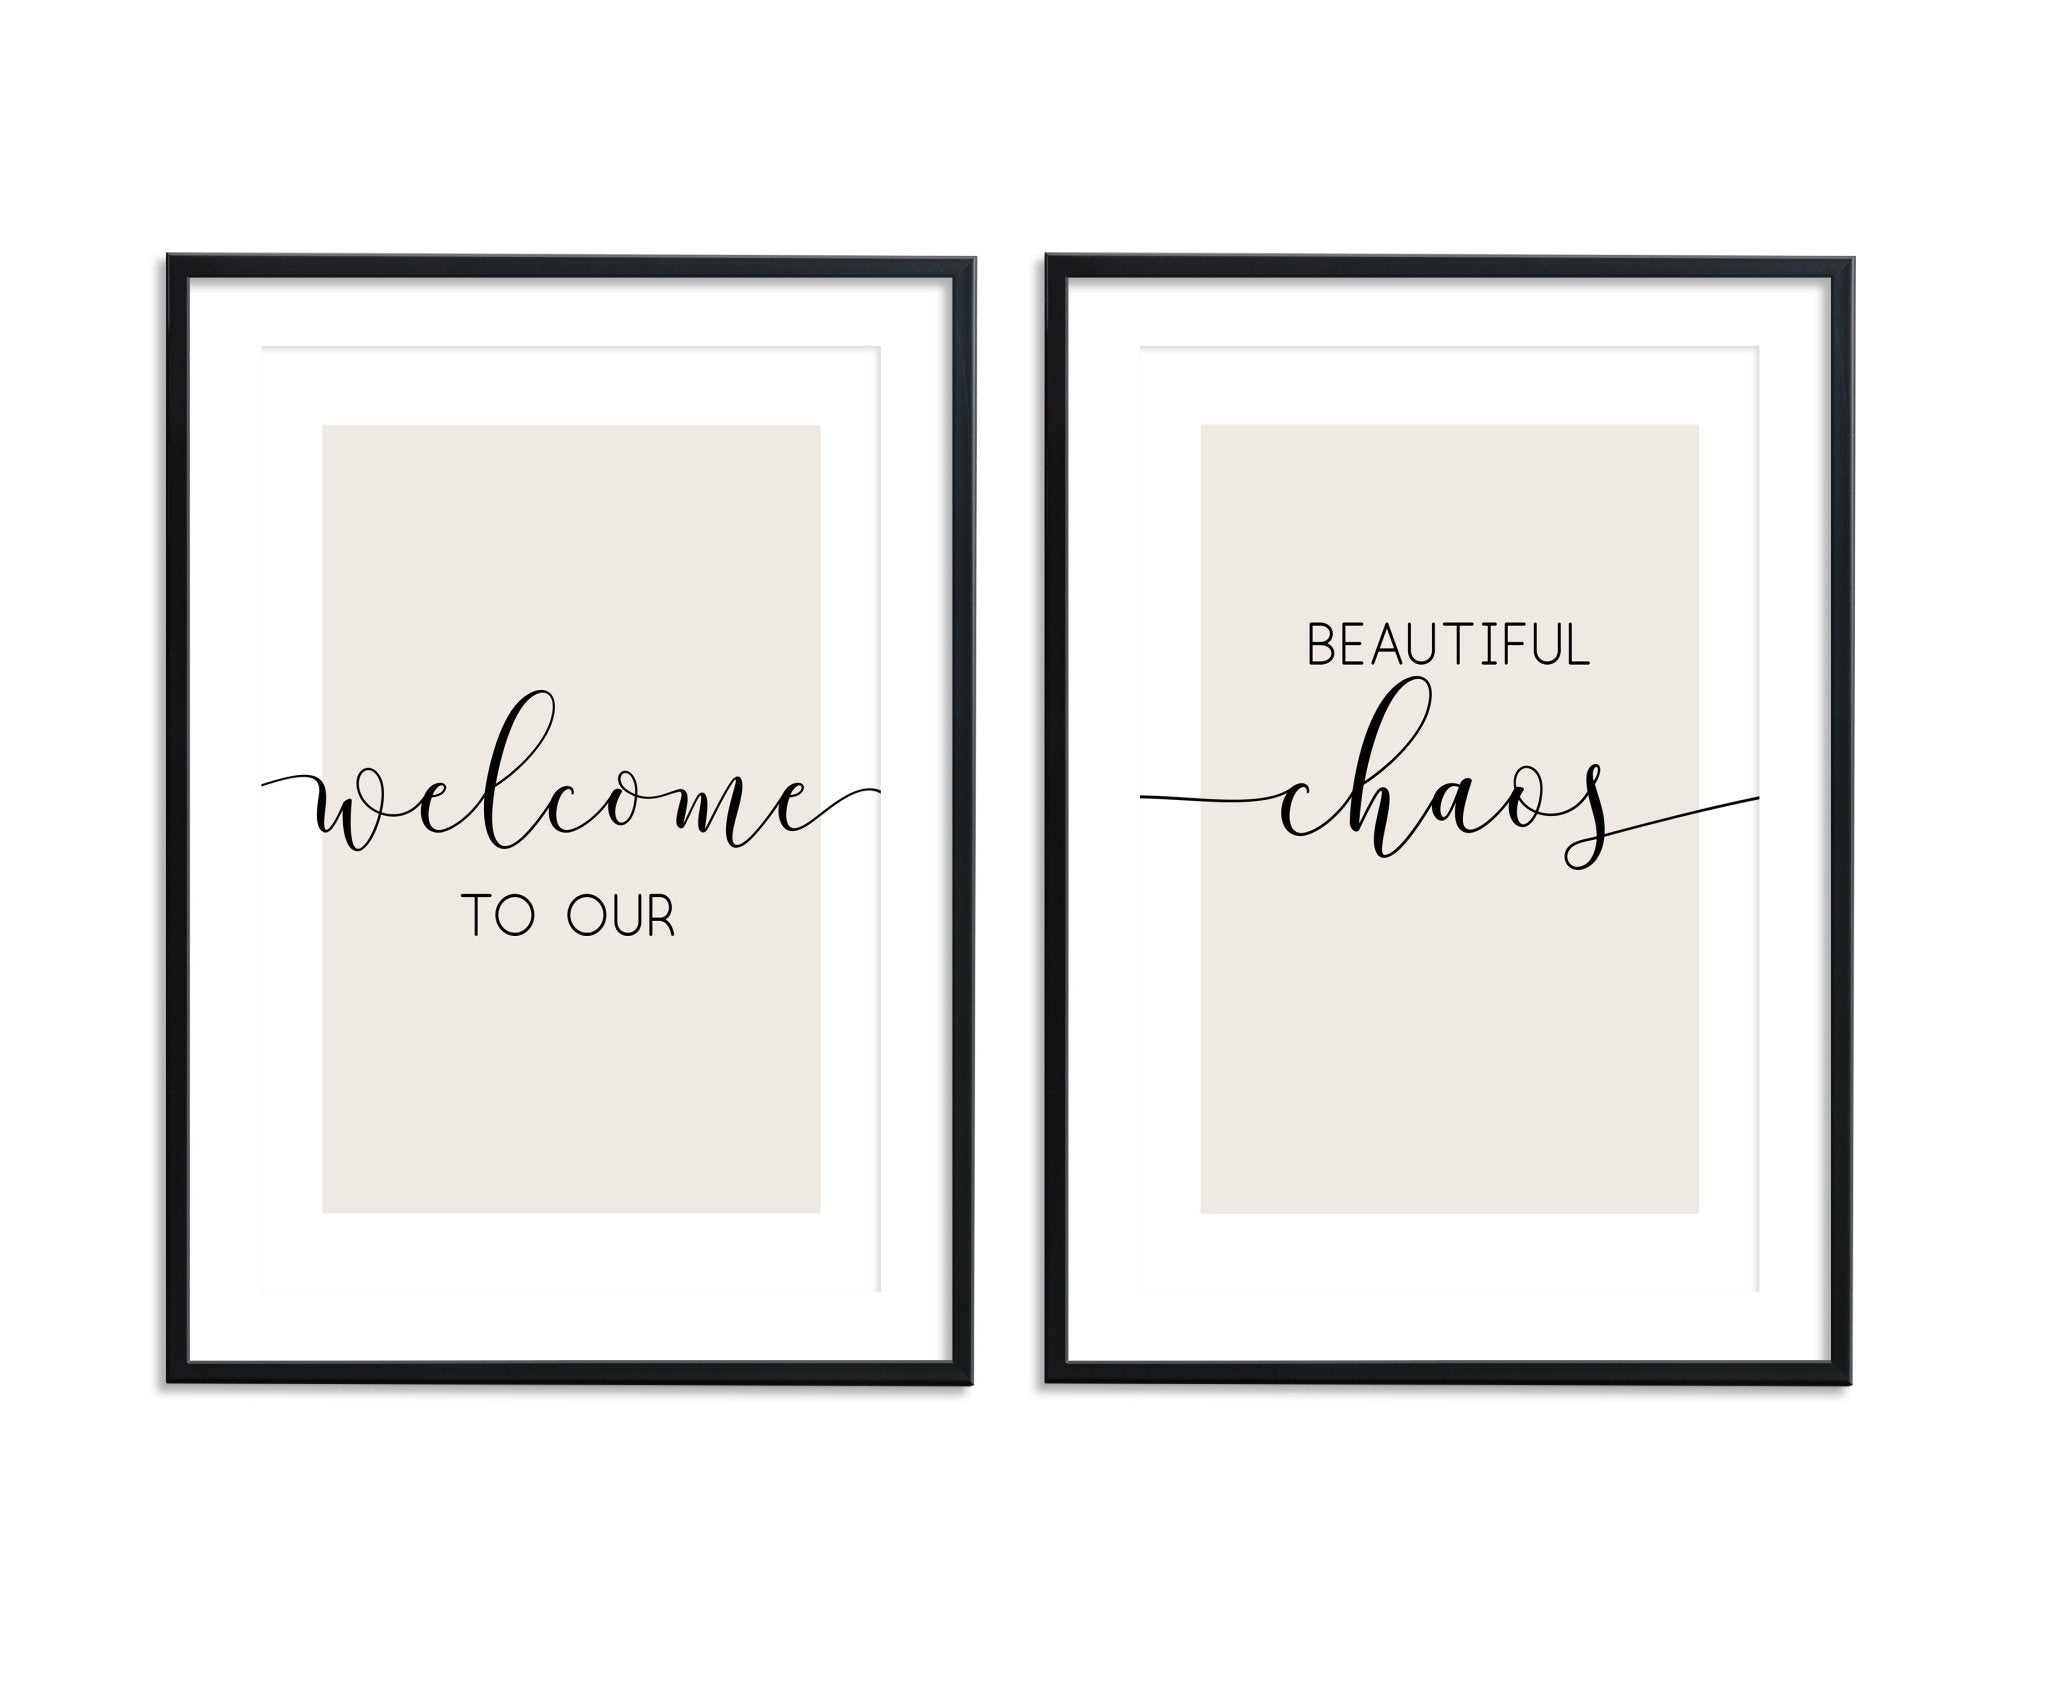 Welcome To Our Beautiful Chaos II - D'Luxe Prints